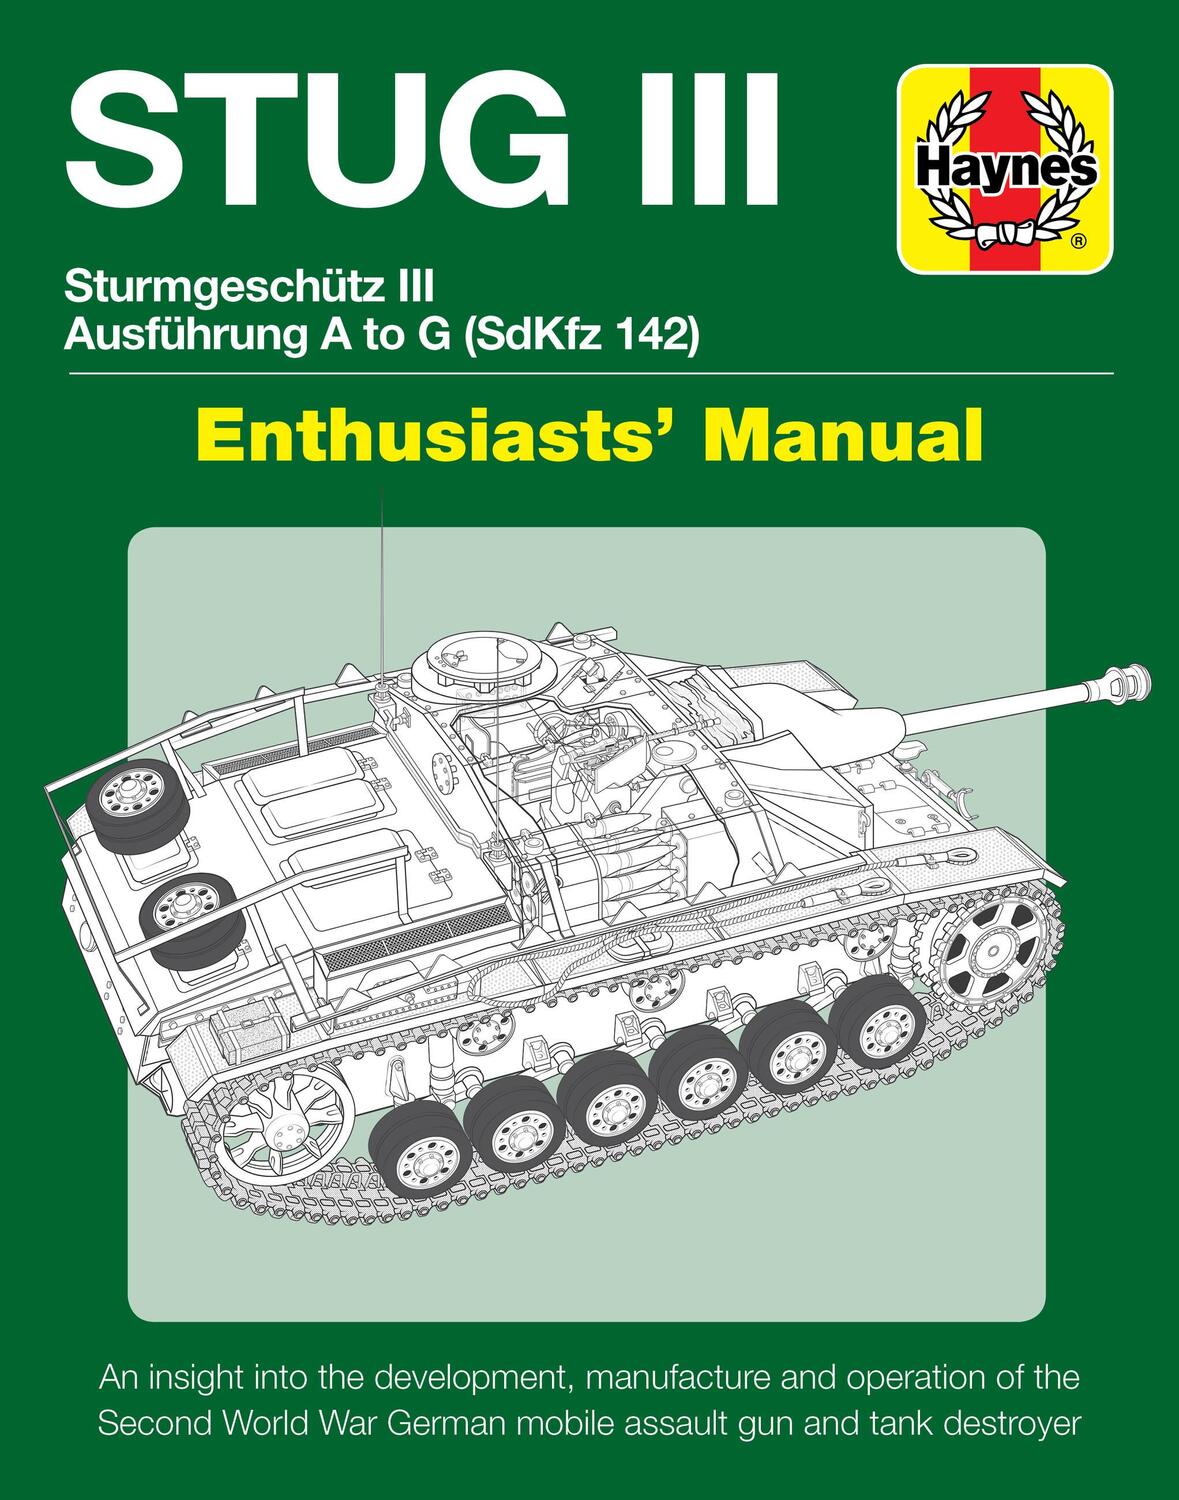 Cover: 9781785212130 | Stug IIl Enthusiasts' Manual | Ausfuhrung A to G (Sd.Kfz.142) | Healy